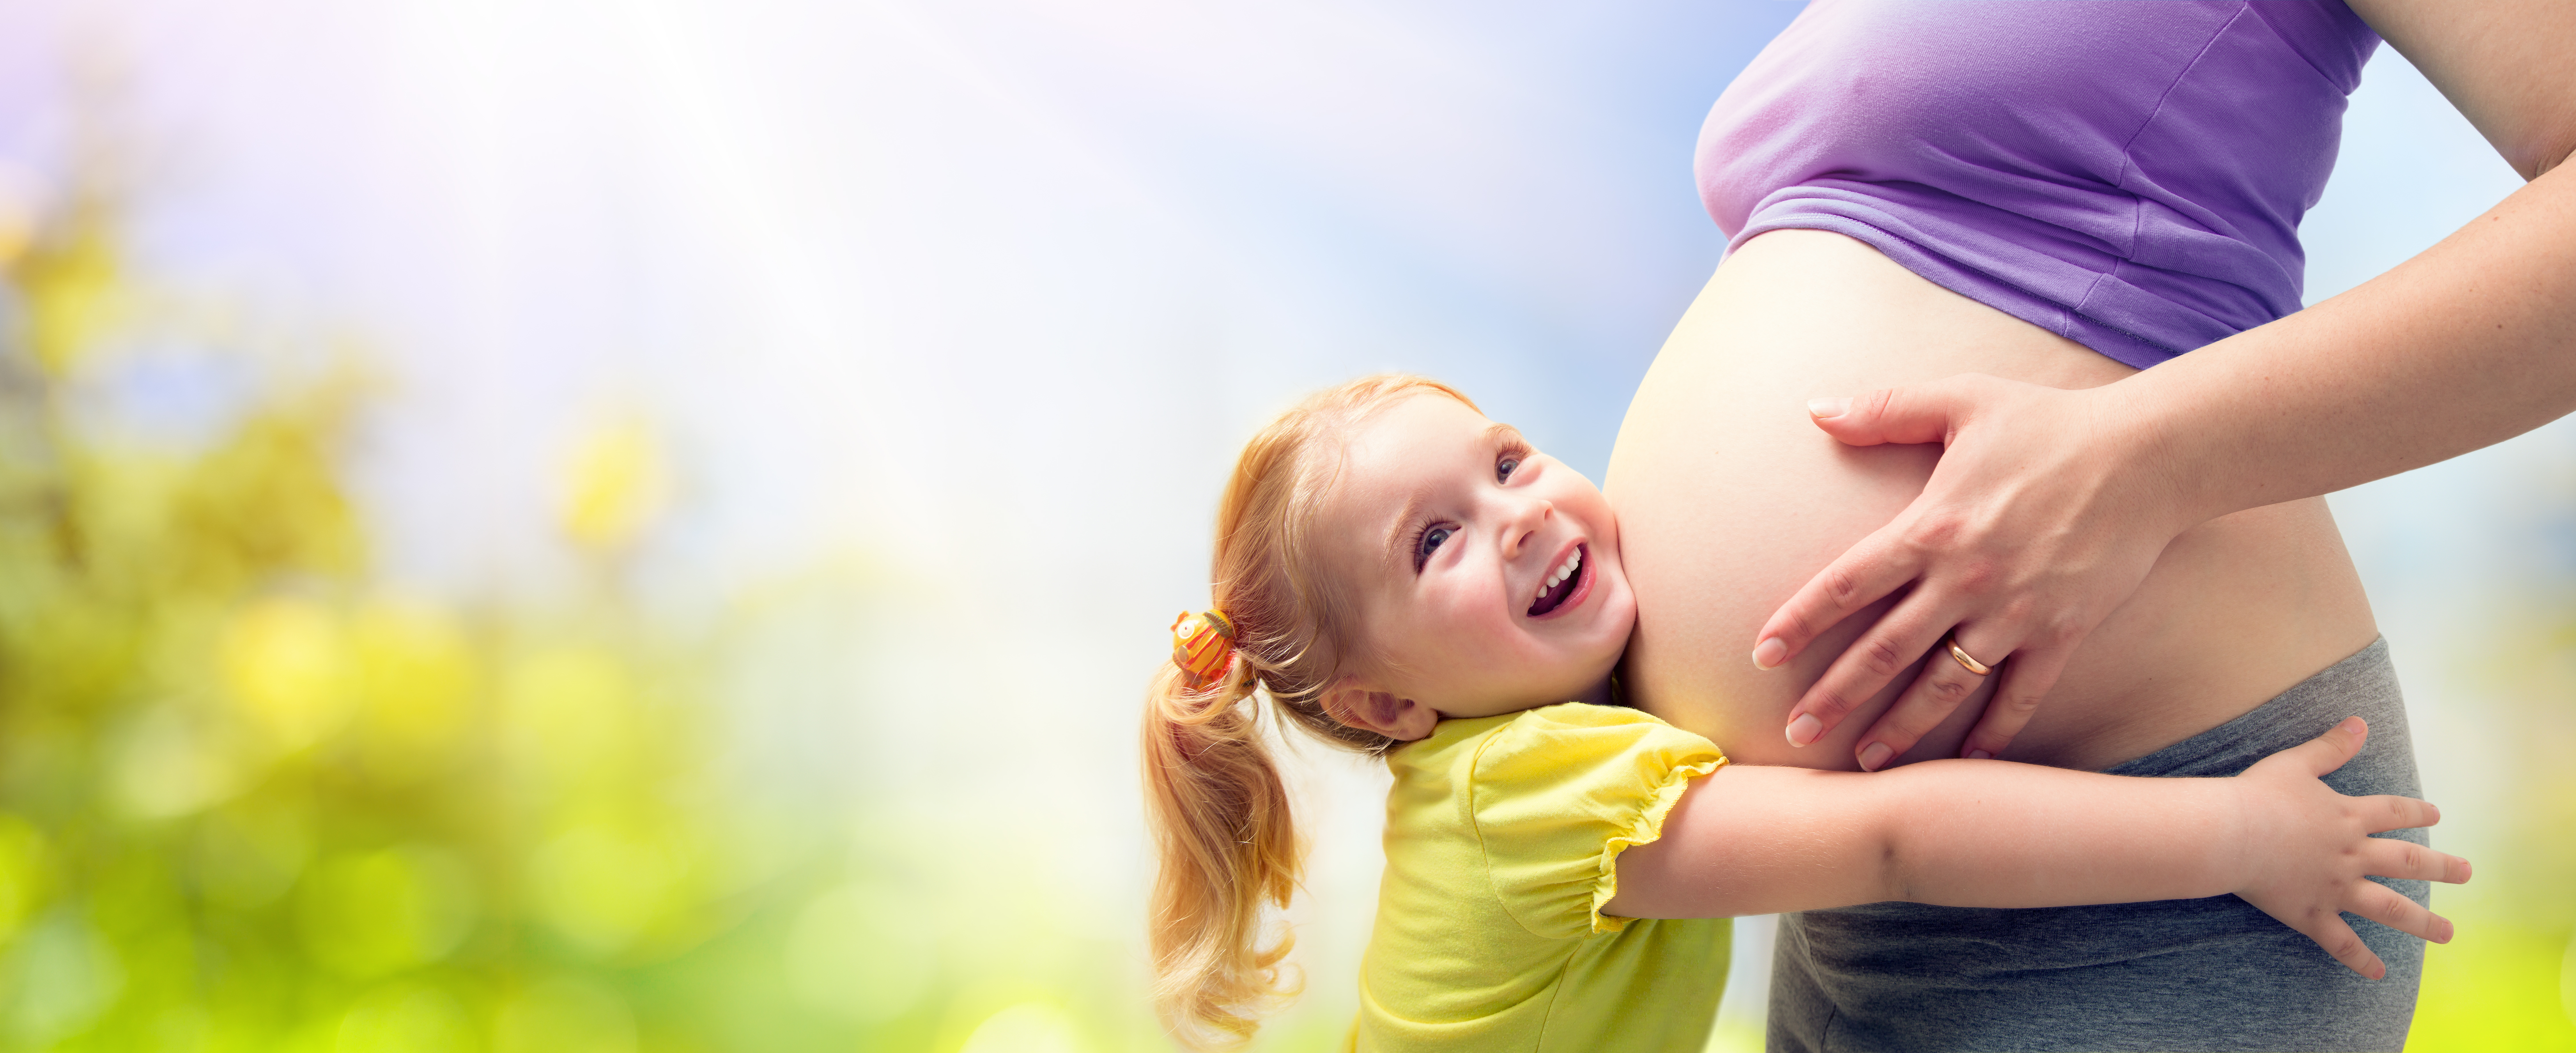 Preparing Your Child for the Separation While You Birth the New Baby